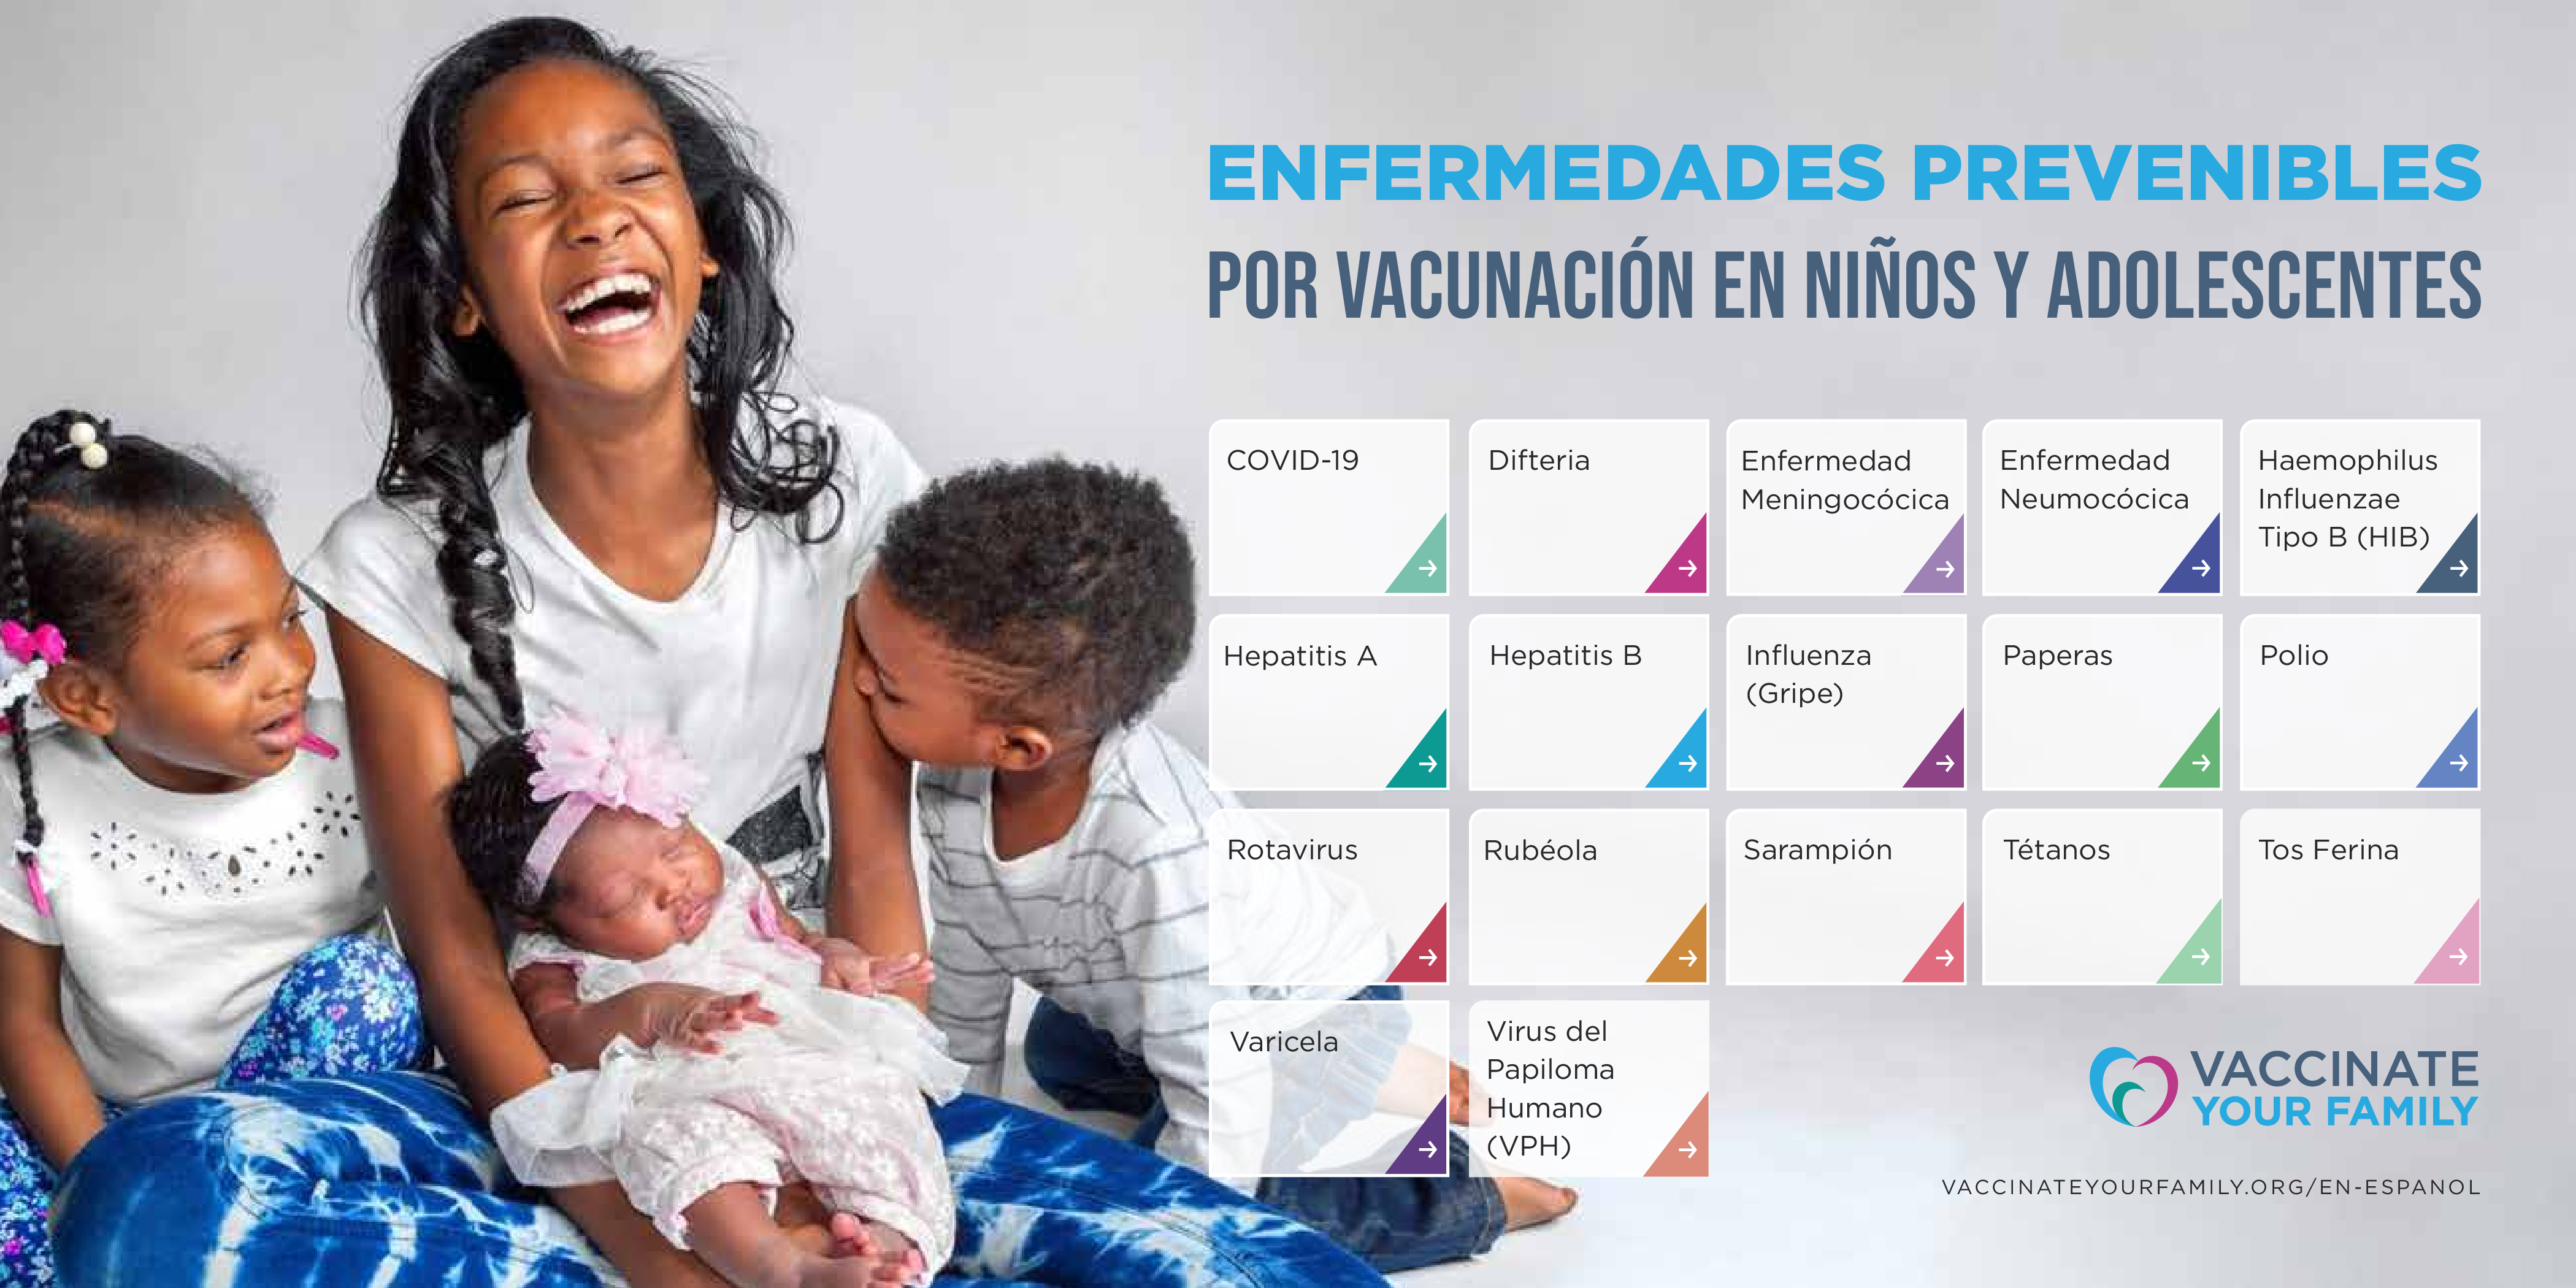 Factsheet stating Child and Teen Vaccine Preventable Diseases. Image shows a happy black family comprised of two children, one infant and one teen. 